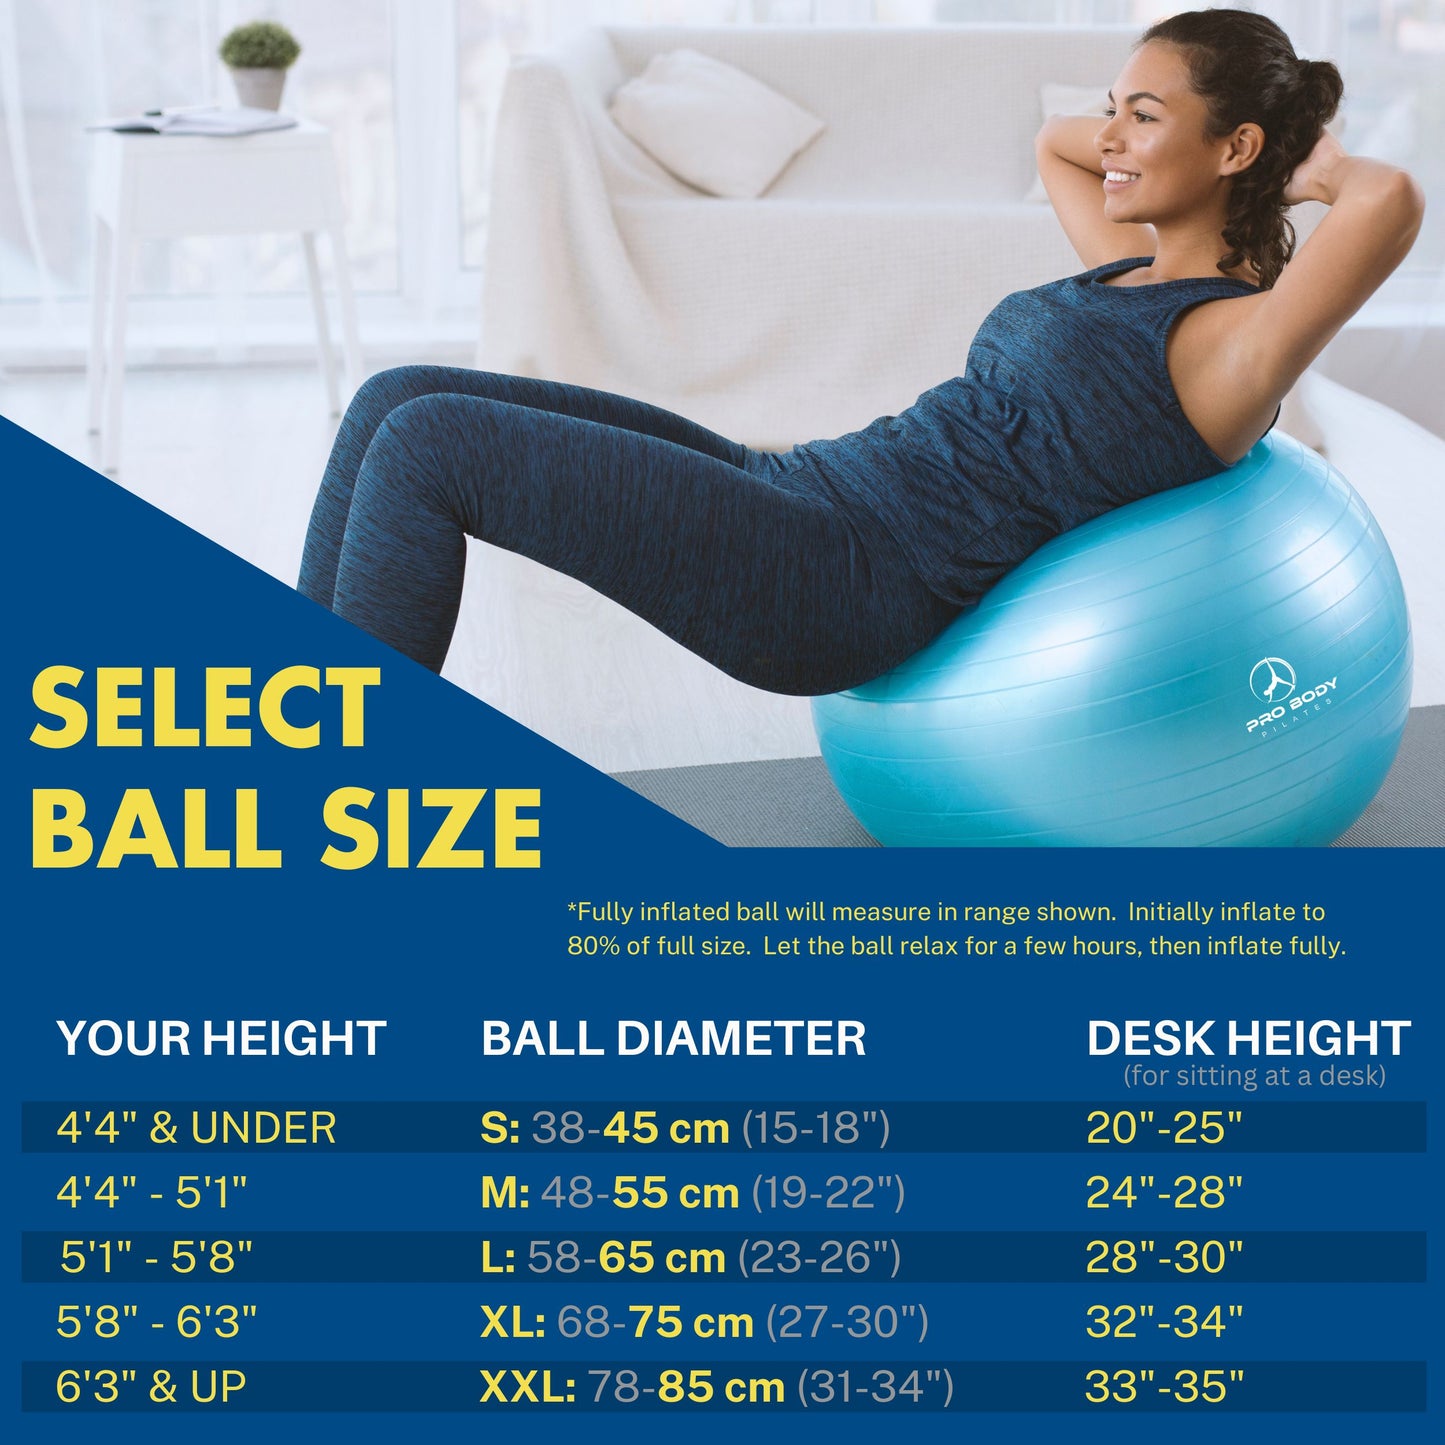 Yoga Ball for Pregnancy, Fitness, Balance, Workout at Home, Office and Physical Therapy (Blue)